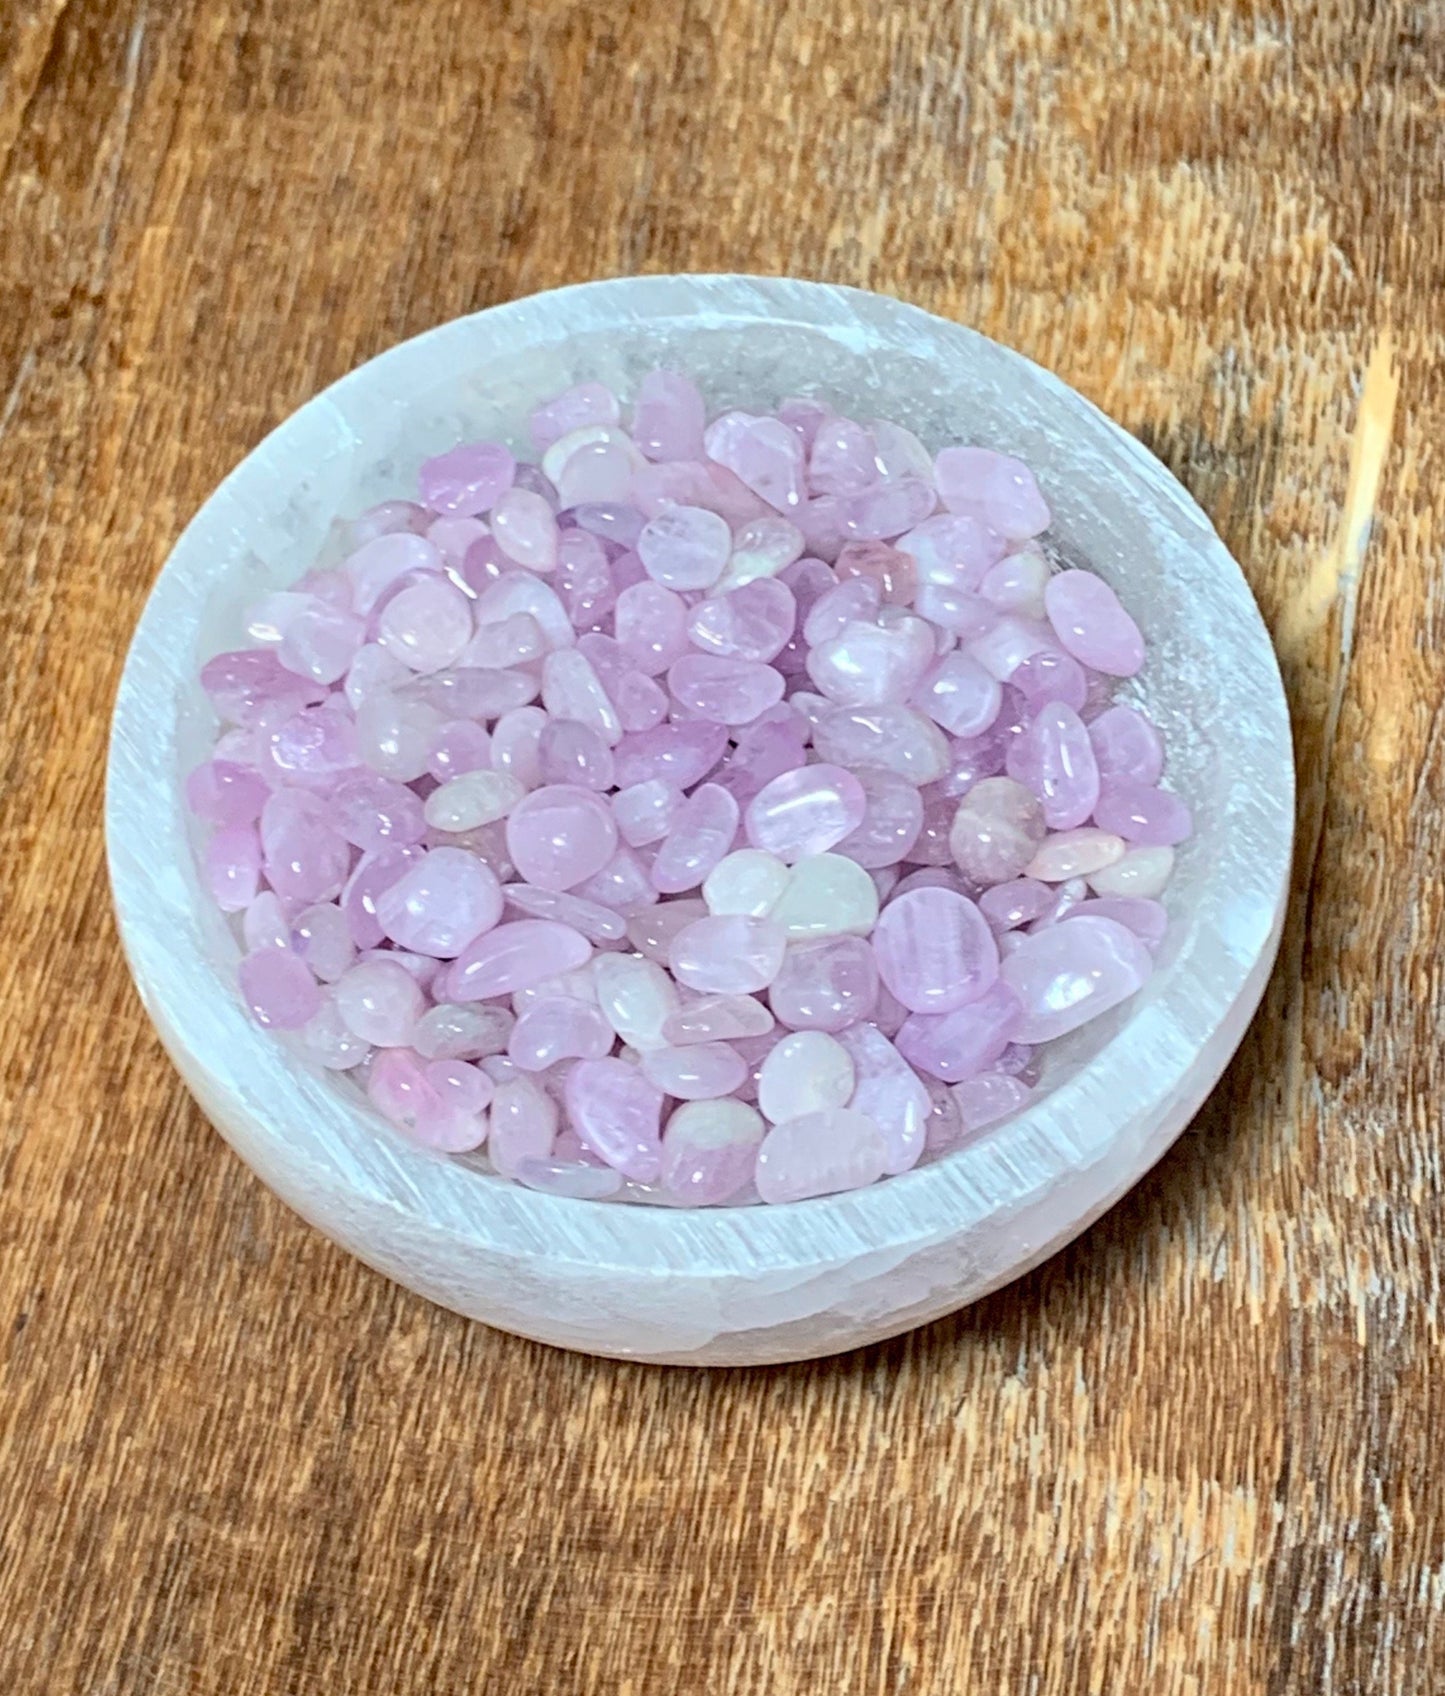 Kunzite Tumbled Crystal Chips / High Quality Natural Gemstone Chips / Bulk Wholesale Crystal Chips / 5-10mm / Crystal Confetti Chips